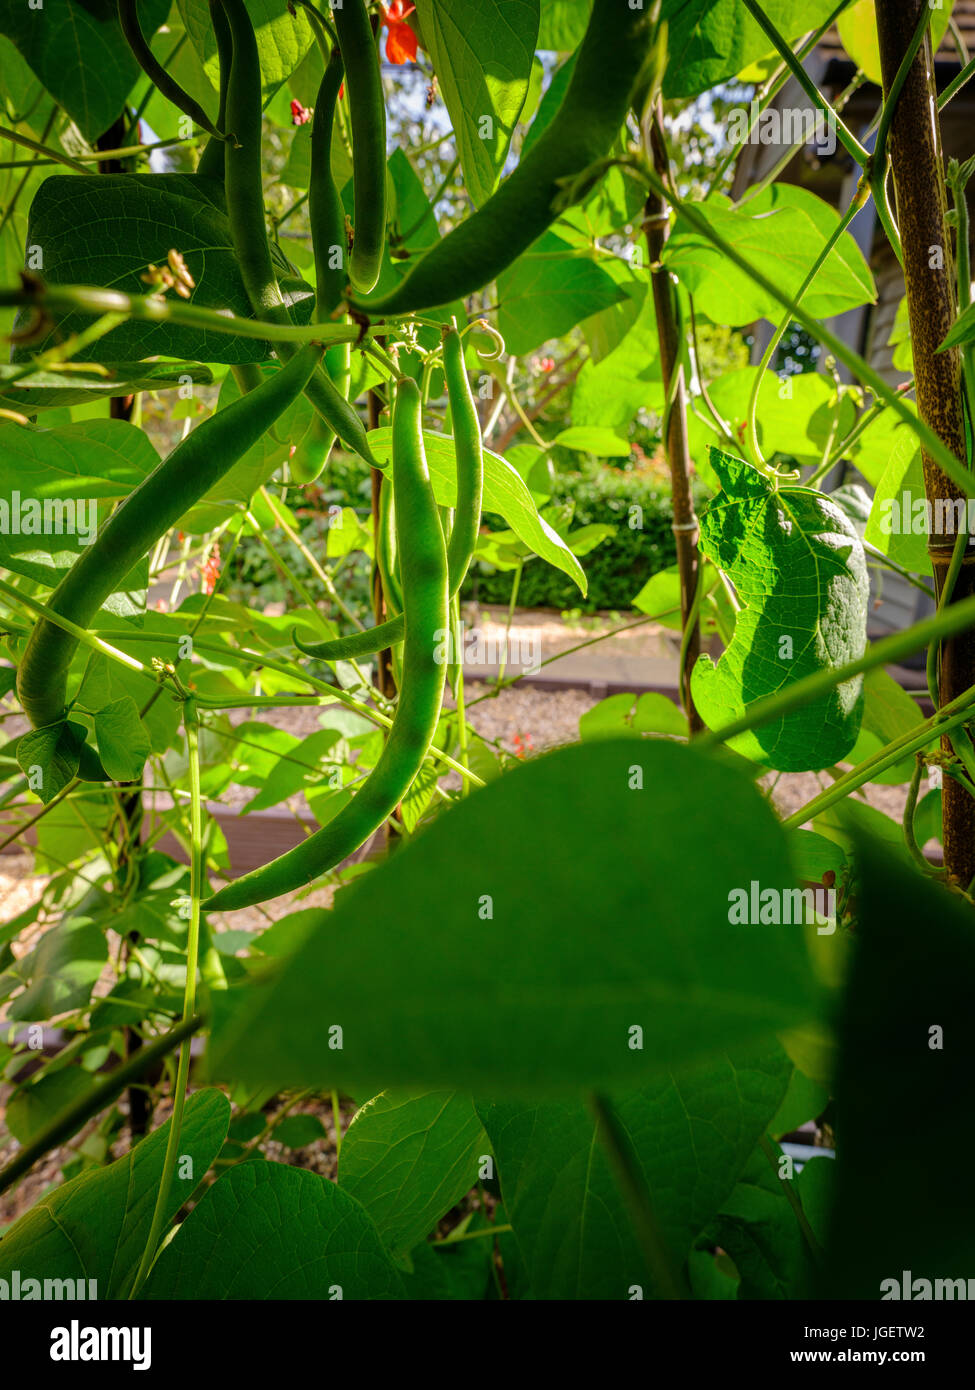 Light passes through runner beans on a plant revealing the seeds within. Sussex, UK Stock Photo